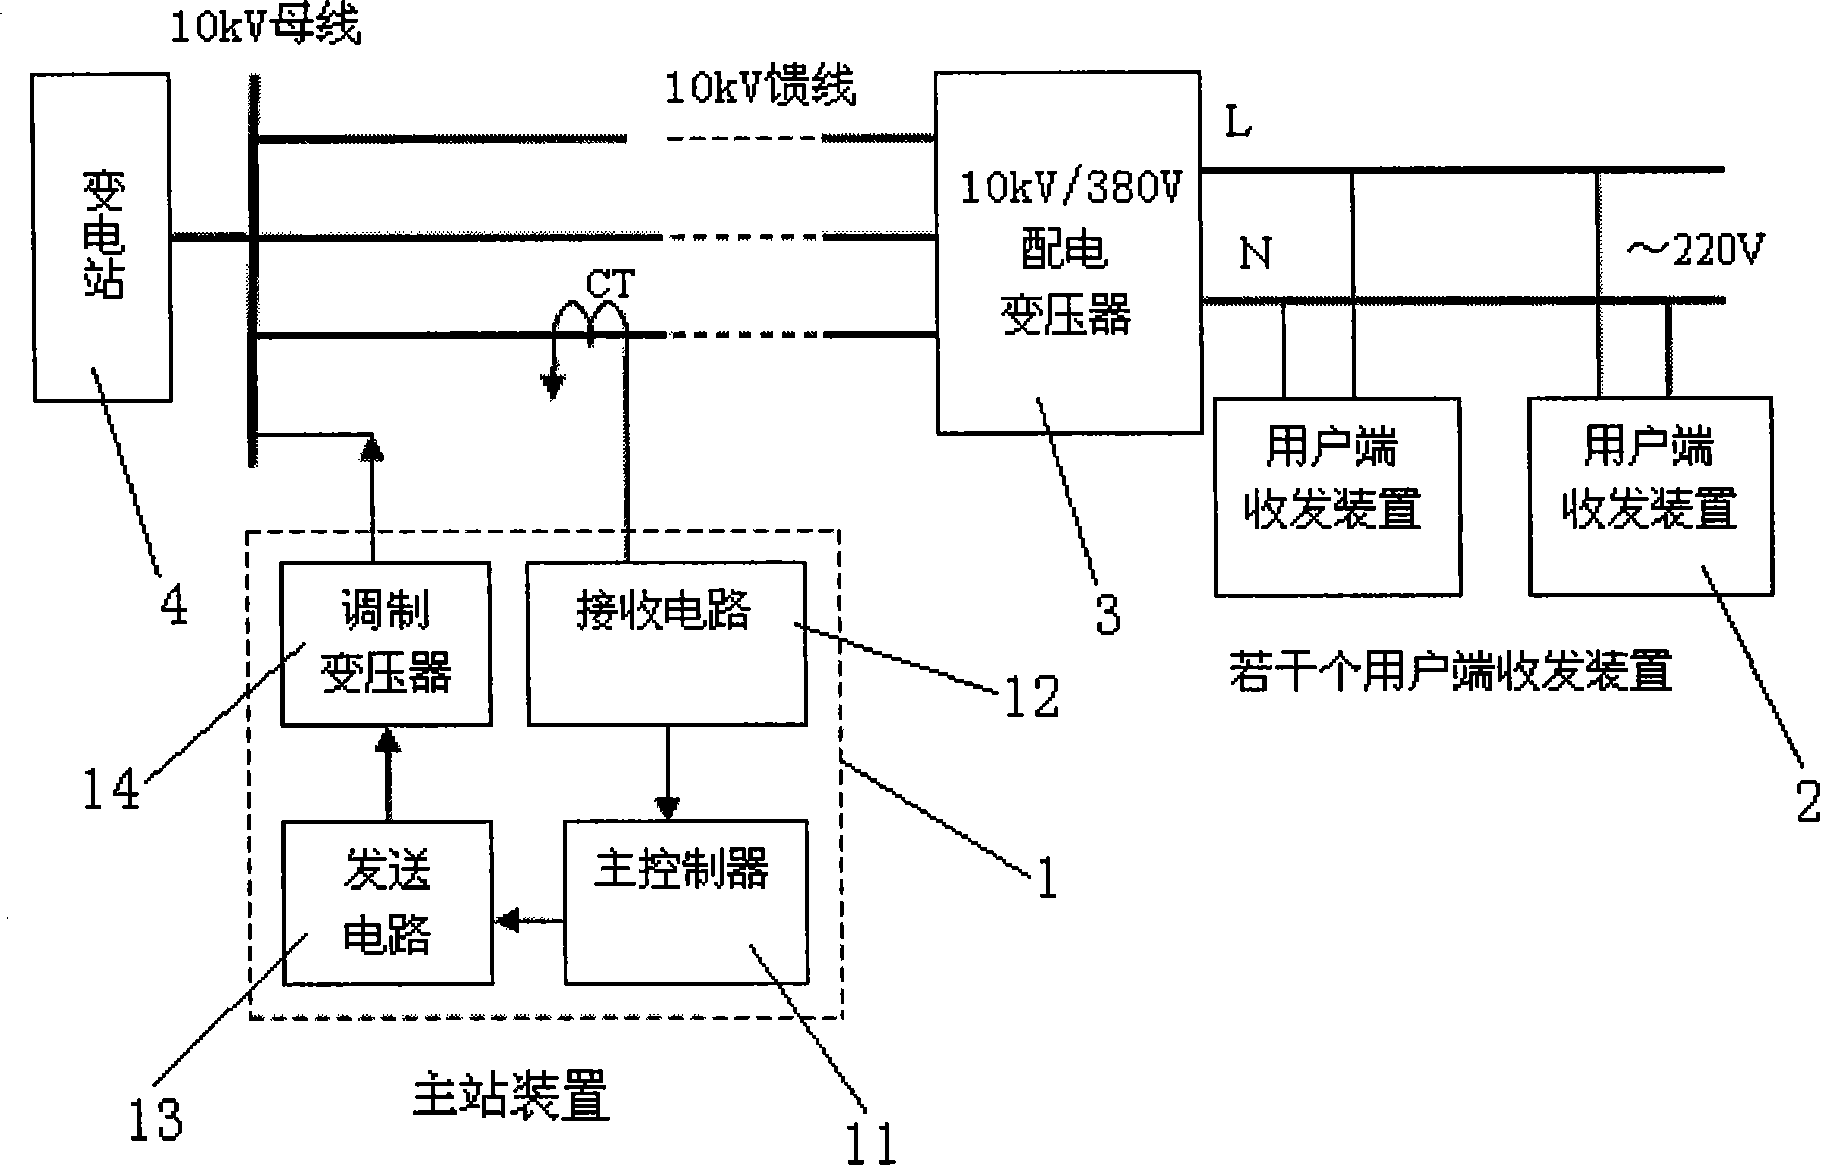 Power distribution network industrial frequency communicating method and system